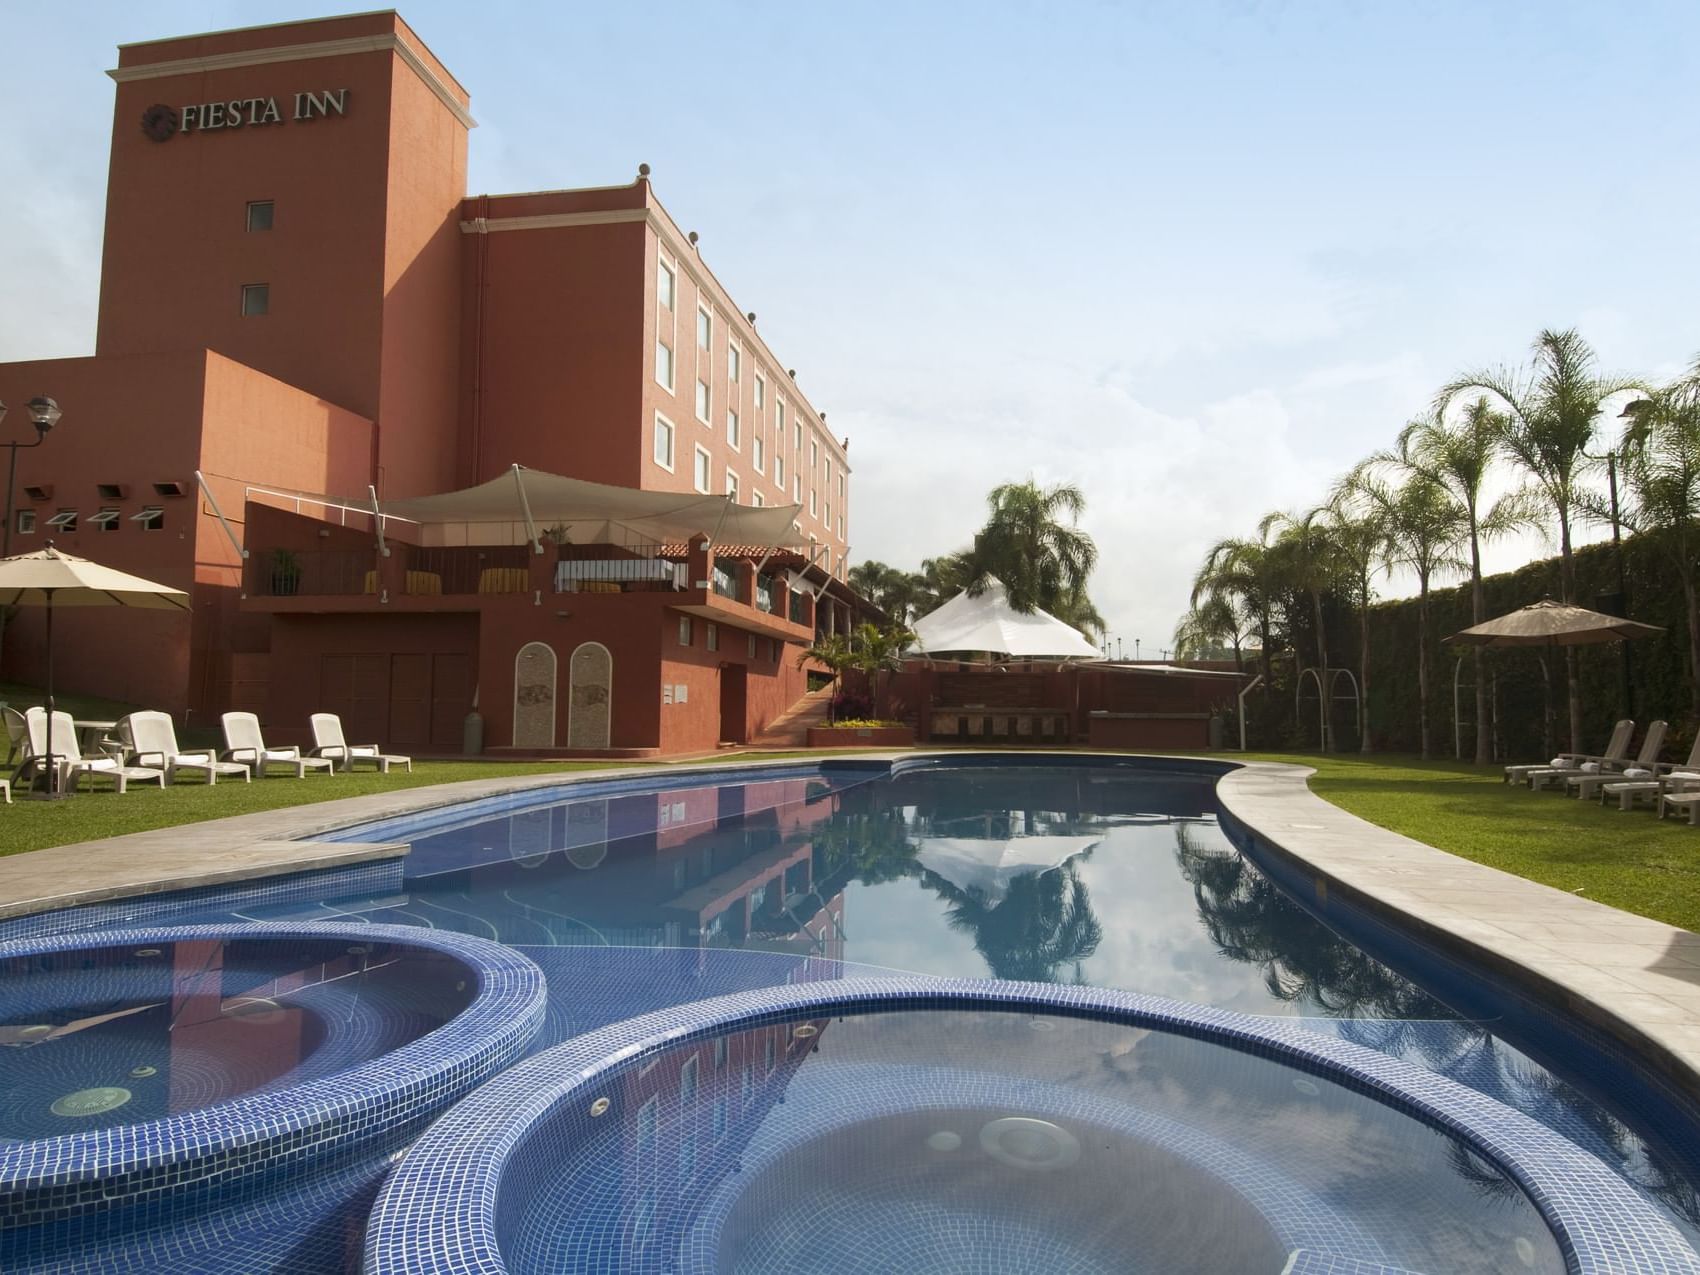 Outdoor swimming pool area & Exterior View of Fiesta Inn Hotel